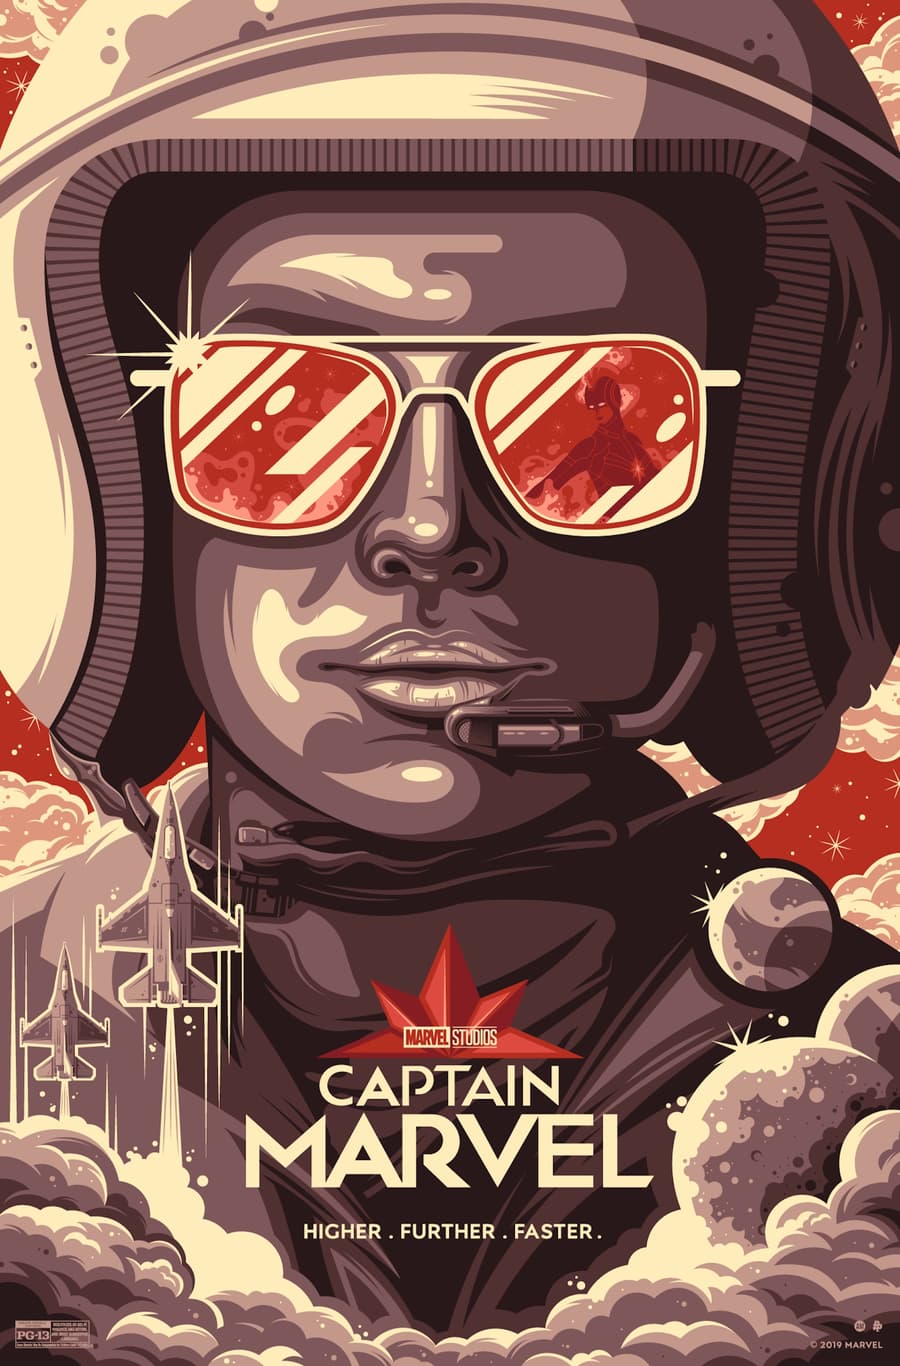 Gallery: Exclusive 'Captain Marvel'-Inspired Posters | Marvel